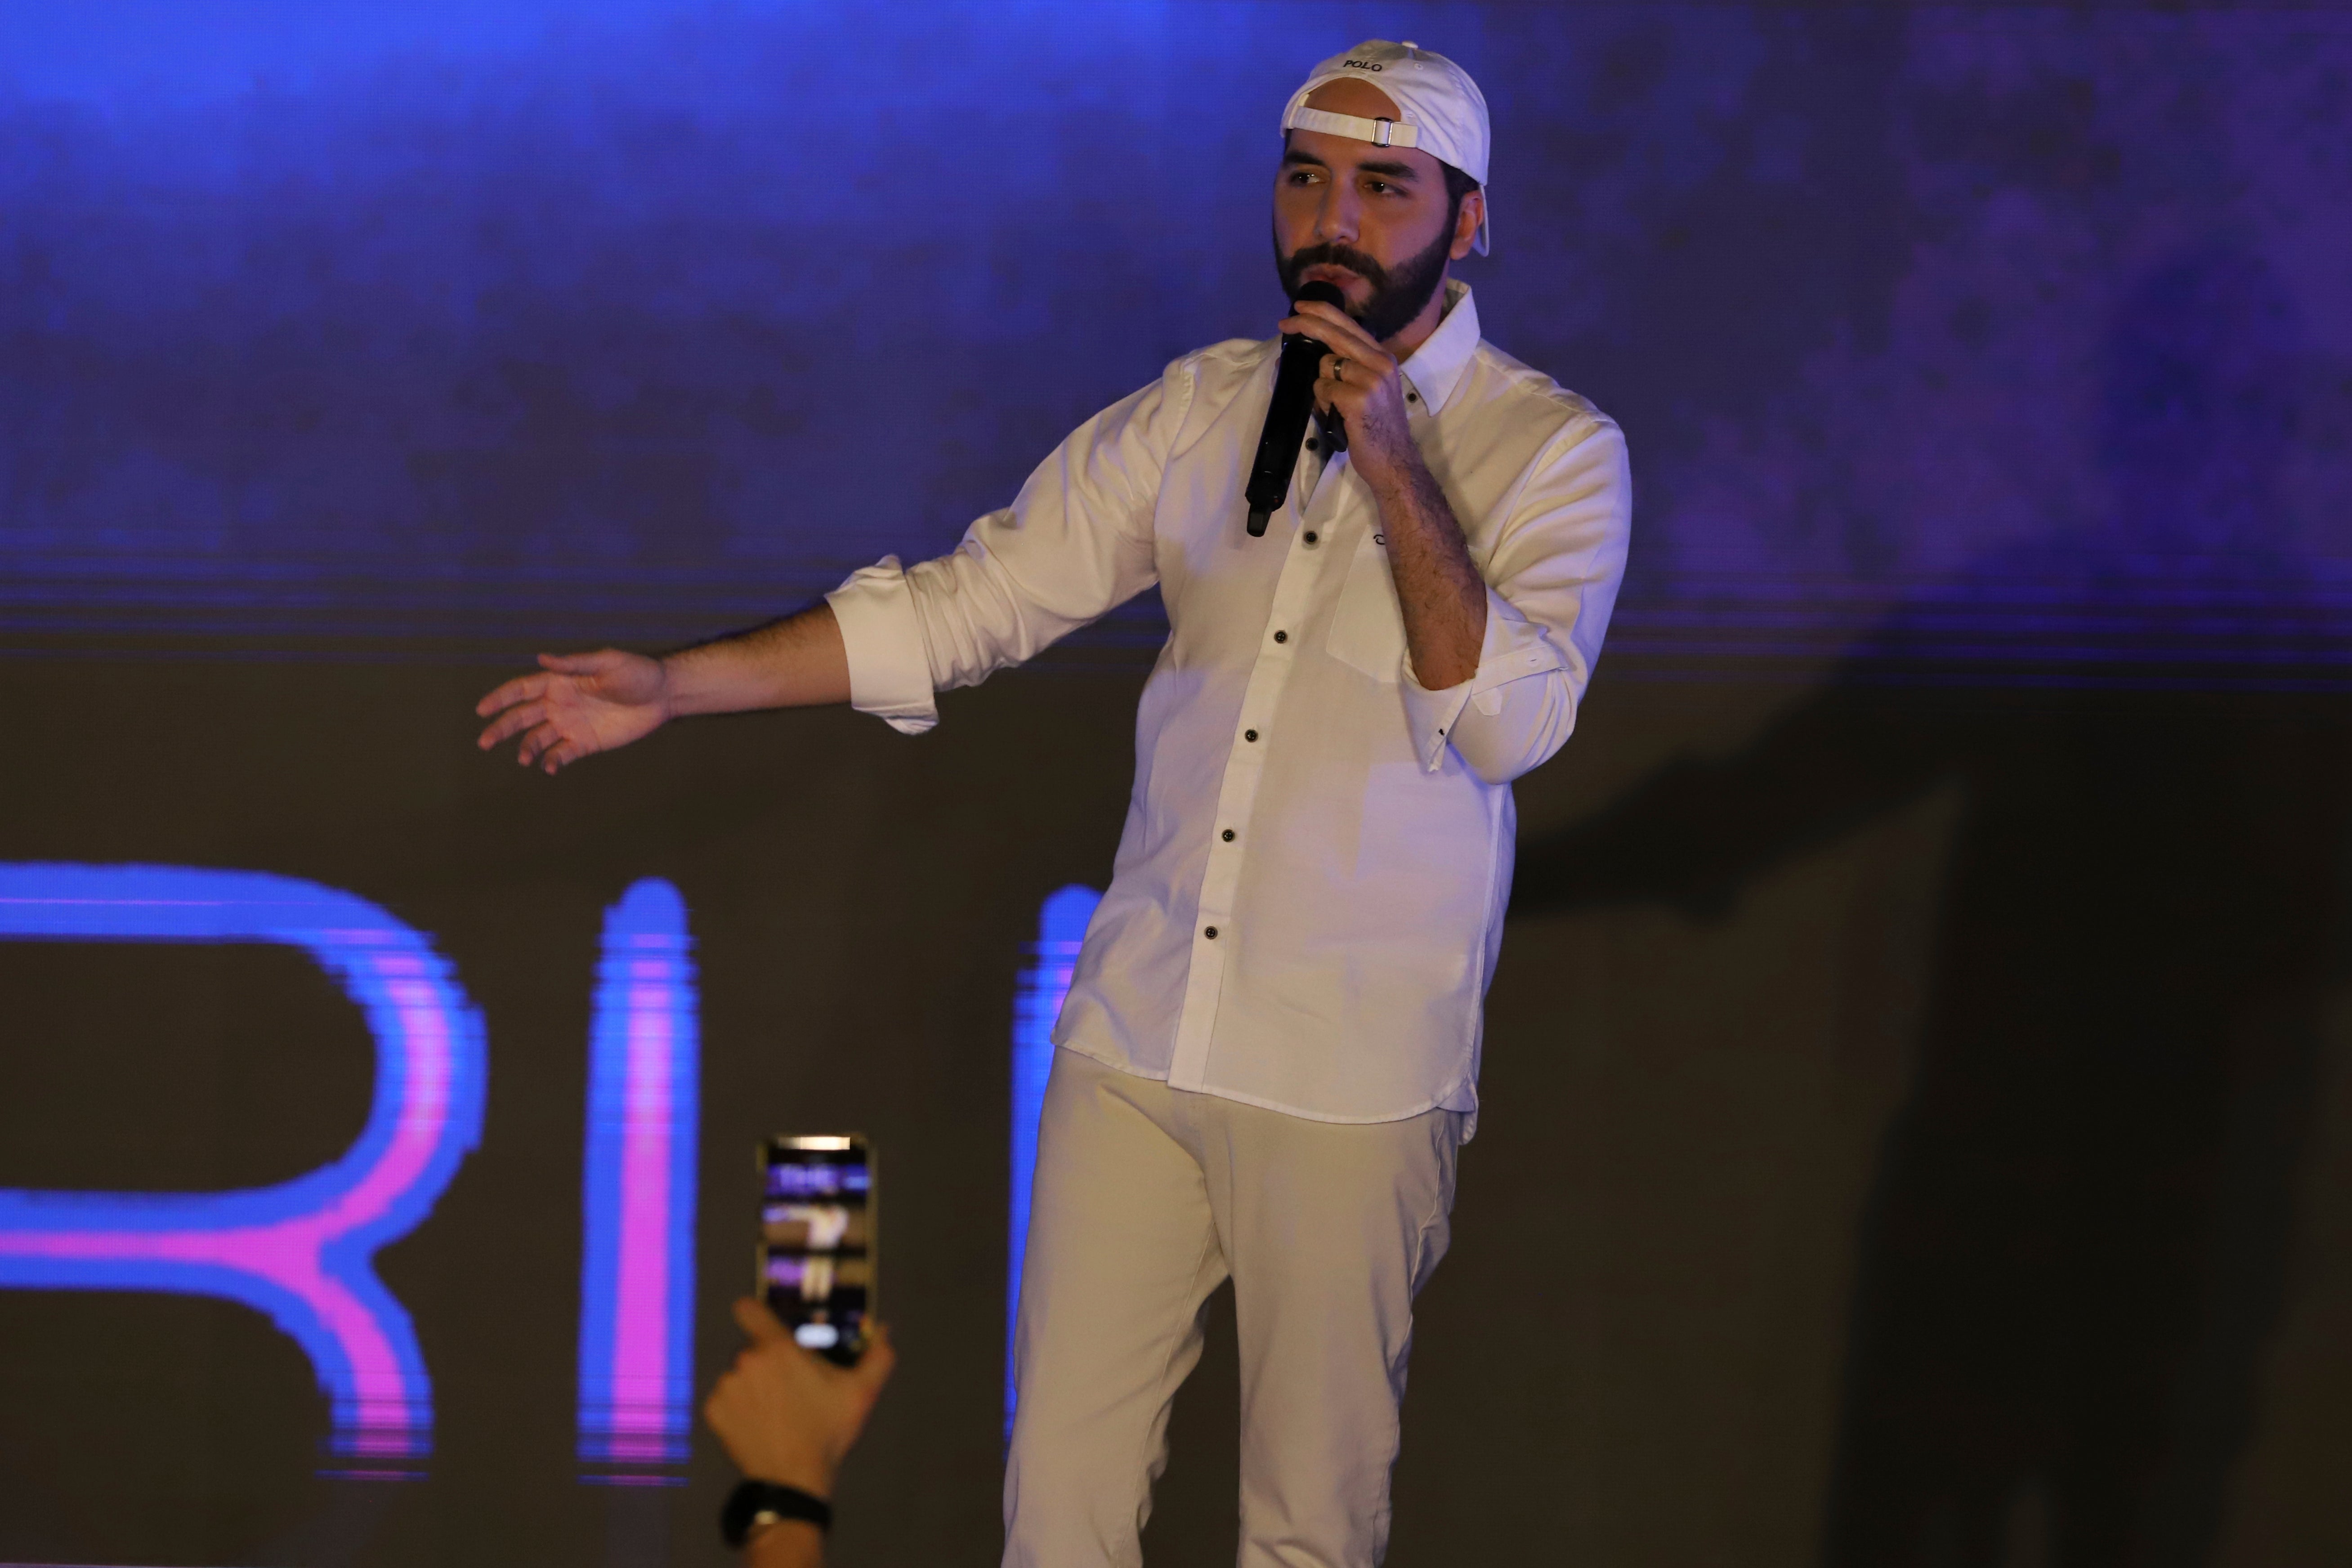 El Salvador President Nayib Bukele speaking at a cryptocurrency conference on 20 November, 2021